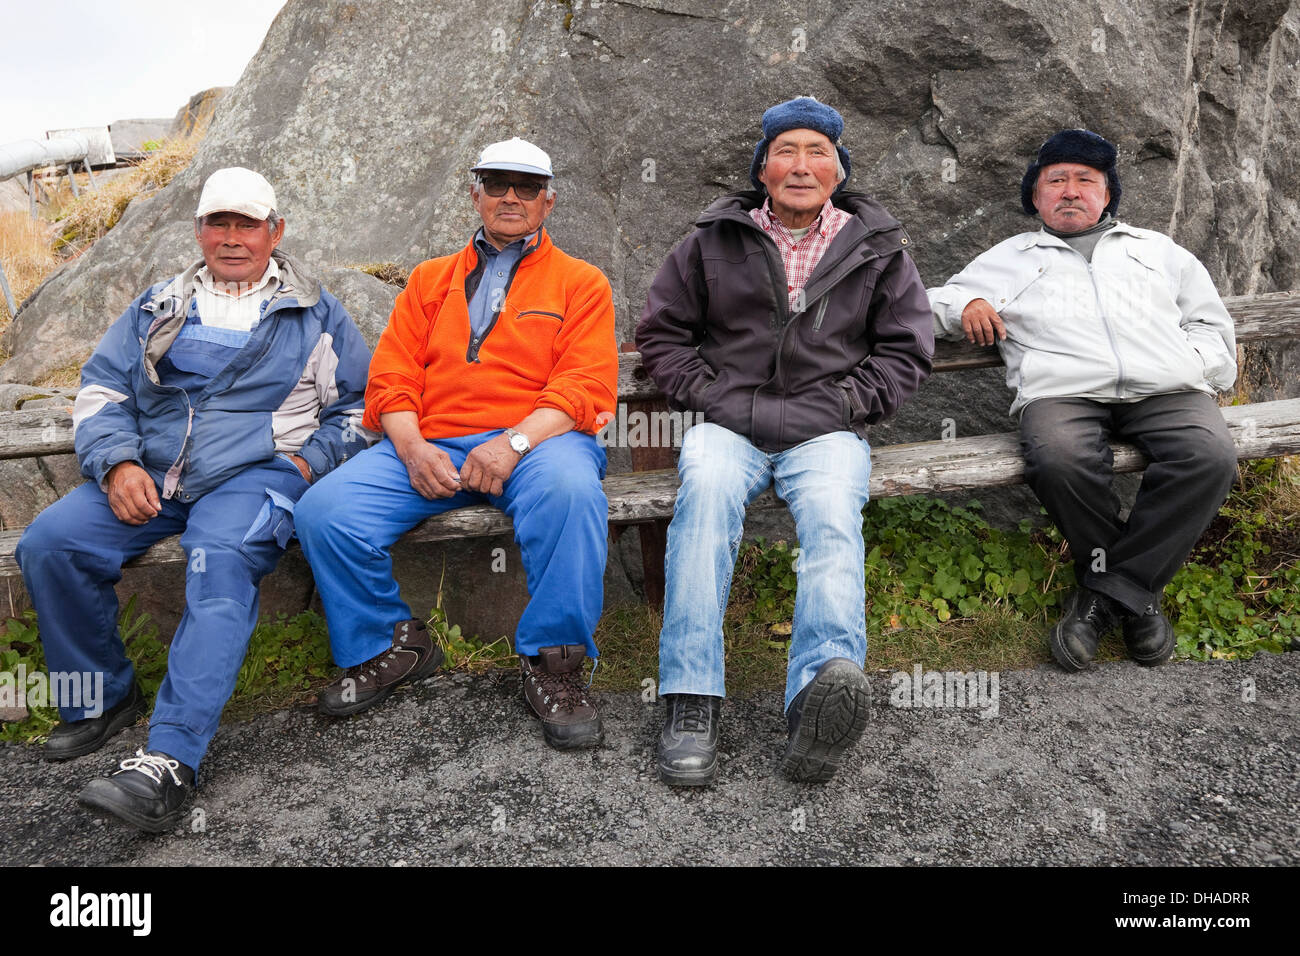 Four Inuit Men Sitting On A Bench In A Village; Kangaamiut, Greenland Stock Photo